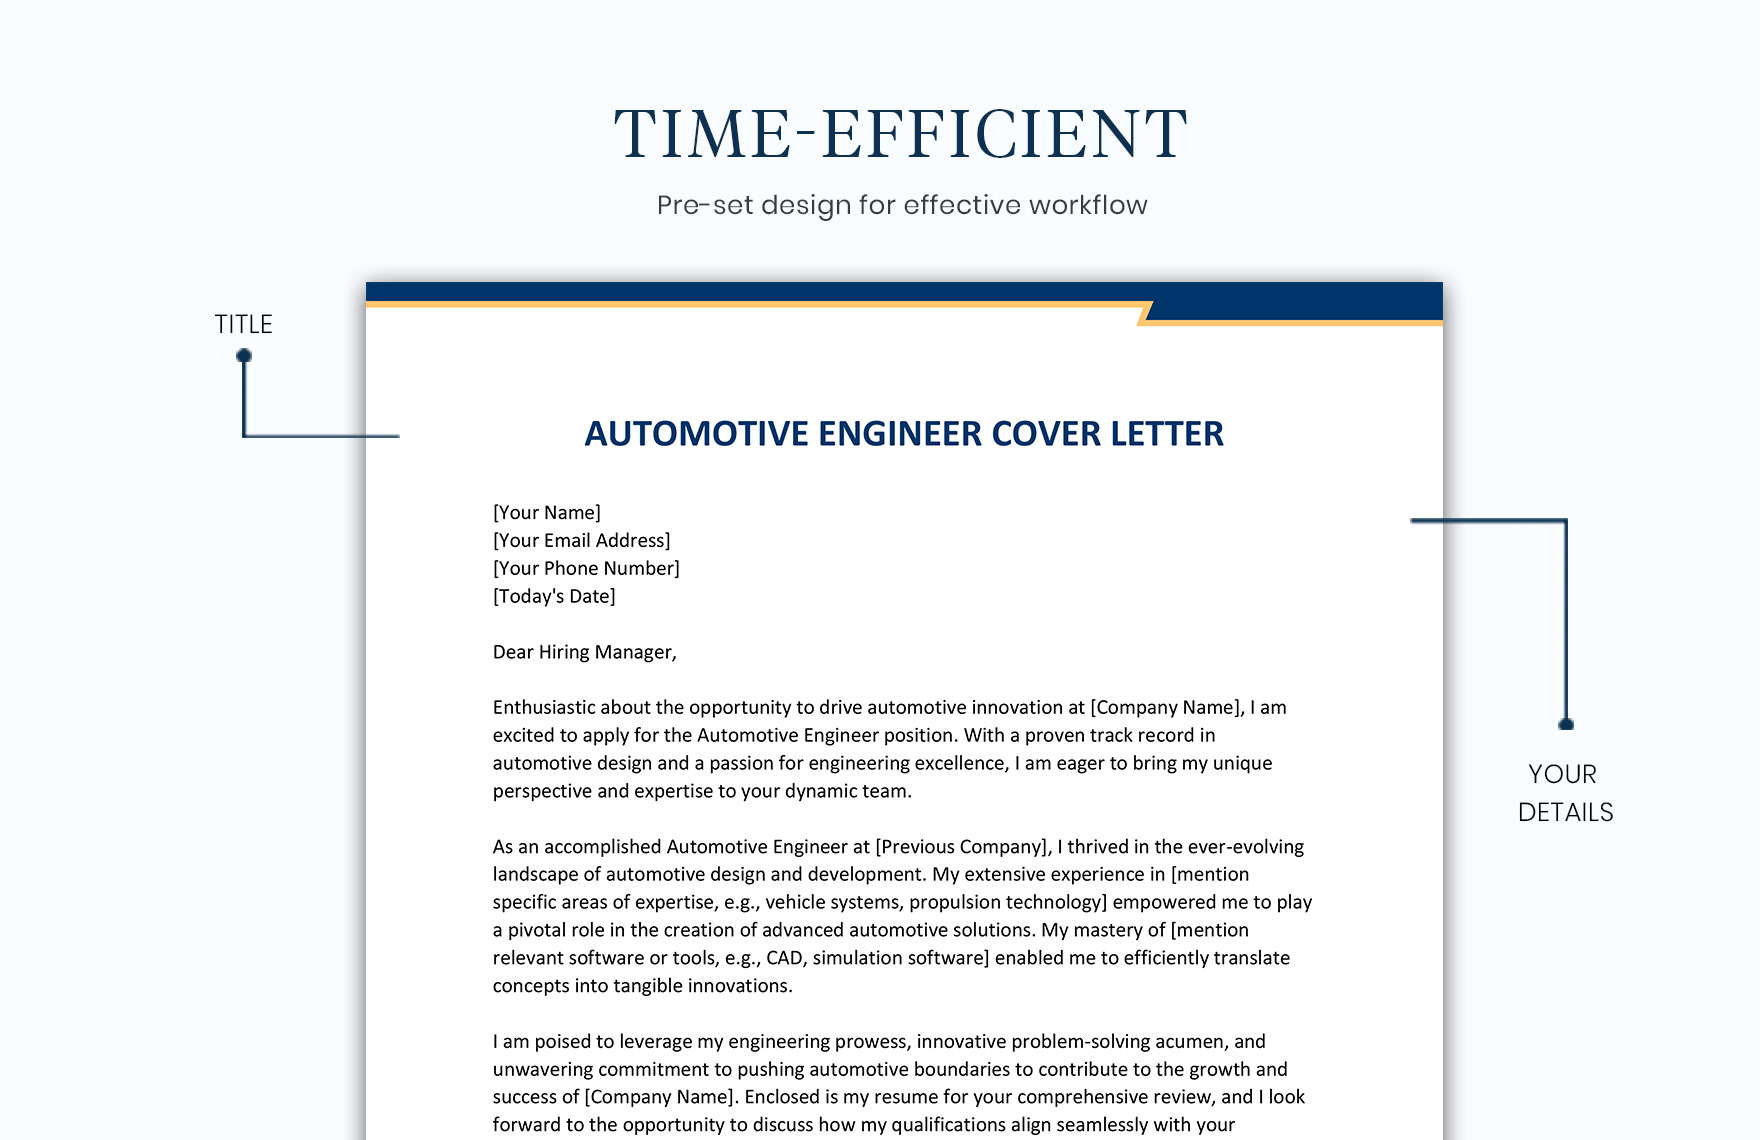 Automotive Engineer Cover Letter